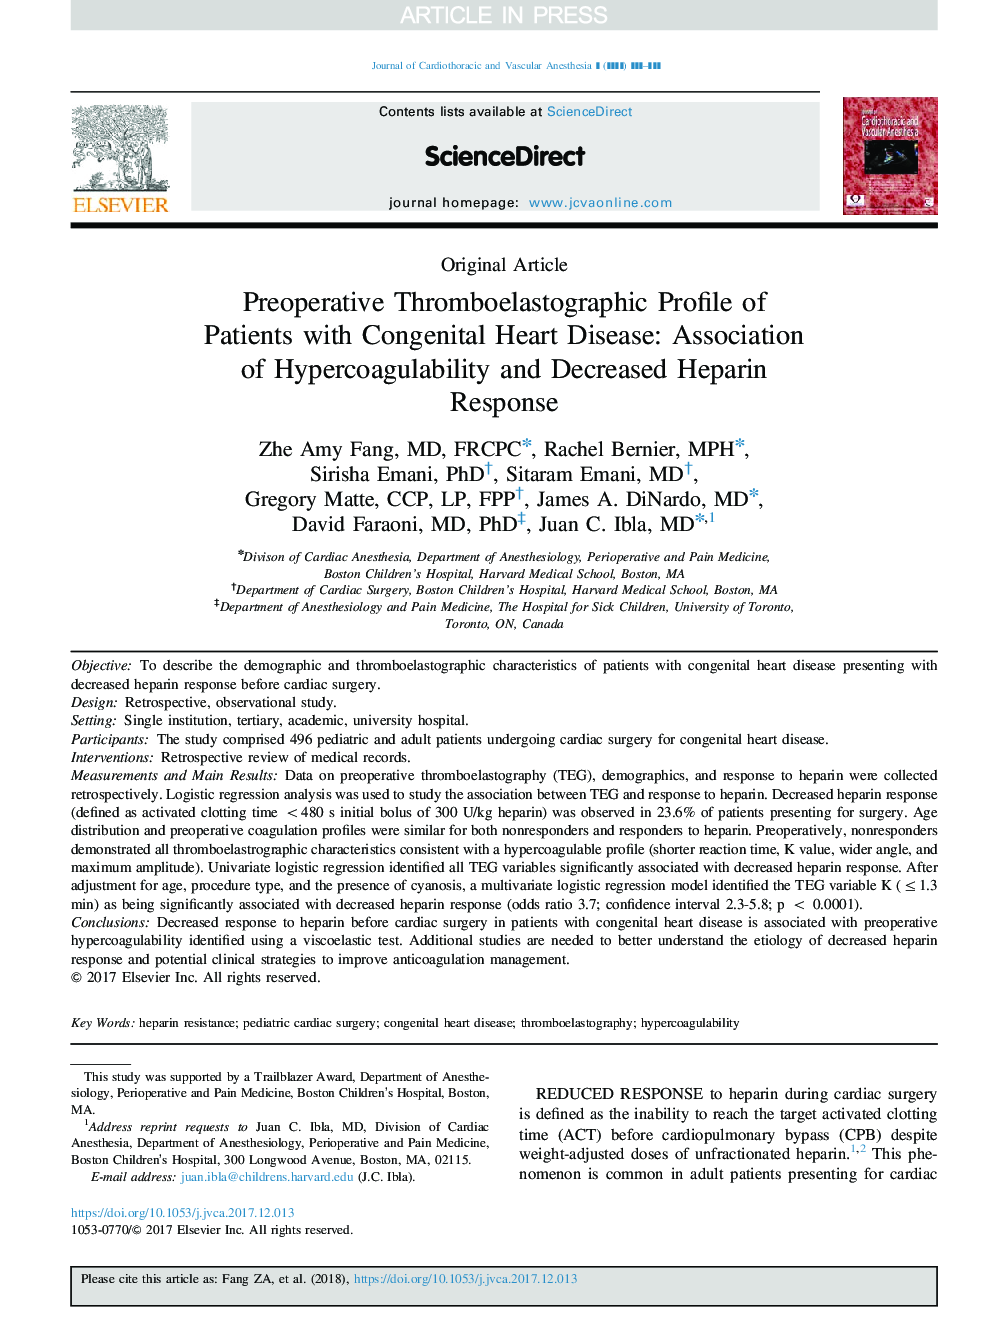 Preoperative Thromboelastographic Profile of Patients with Congenital Heart Disease: Association of Hypercoagulability and Decreased Heparin Response